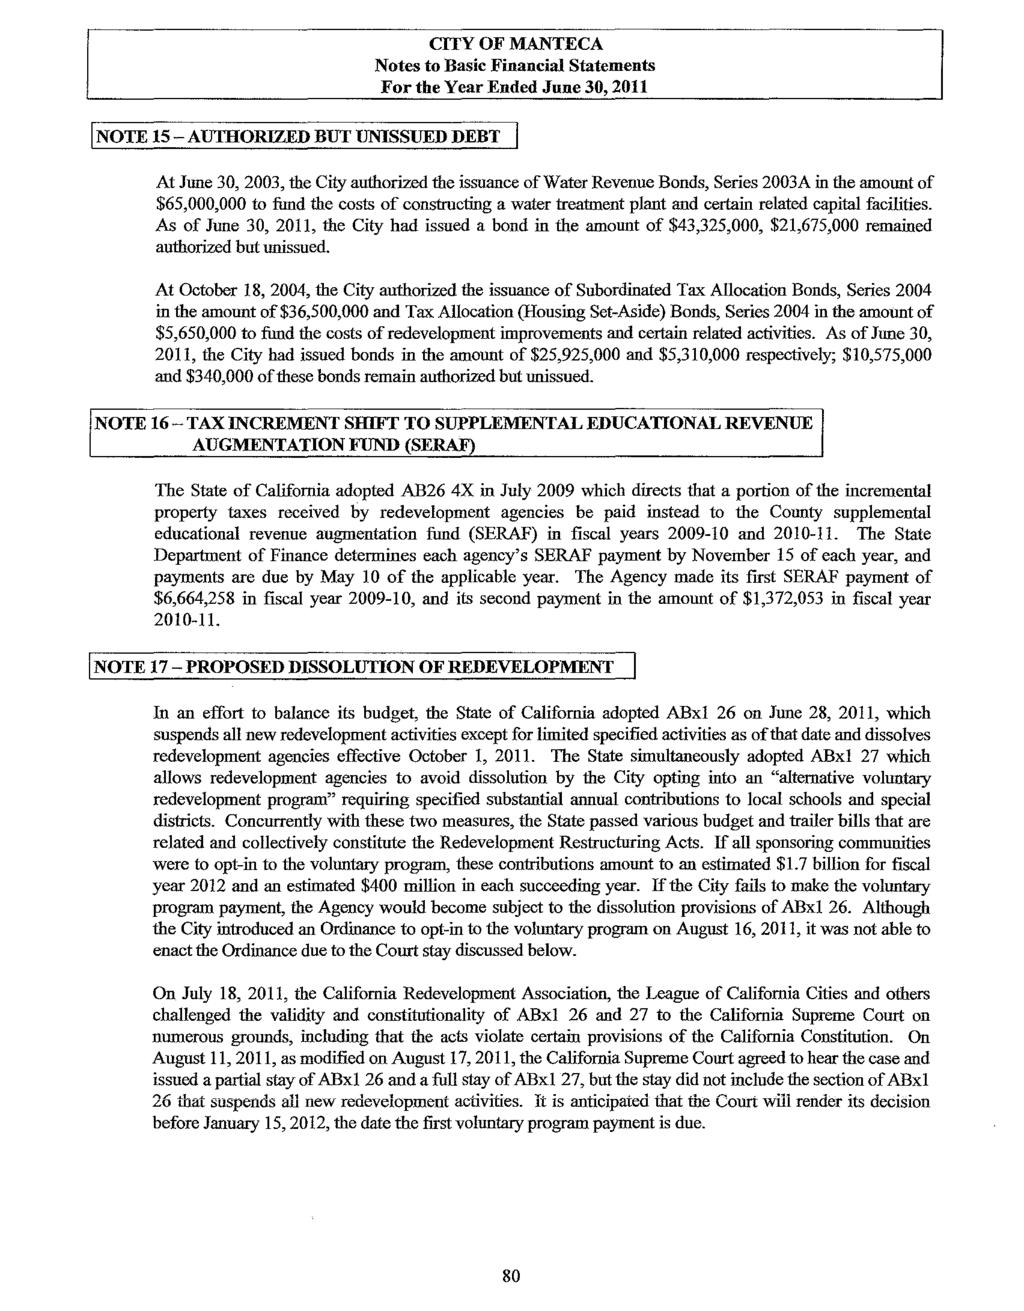 CITY OF MANTECA Notes to Basic Financial Statements For the Year Ended June 30, 2011 I NOTE 15 - AUTHORIZED BUT UNISSUED DEBT I At June 30, 2003, the City authorized the issuance of Water Revenue